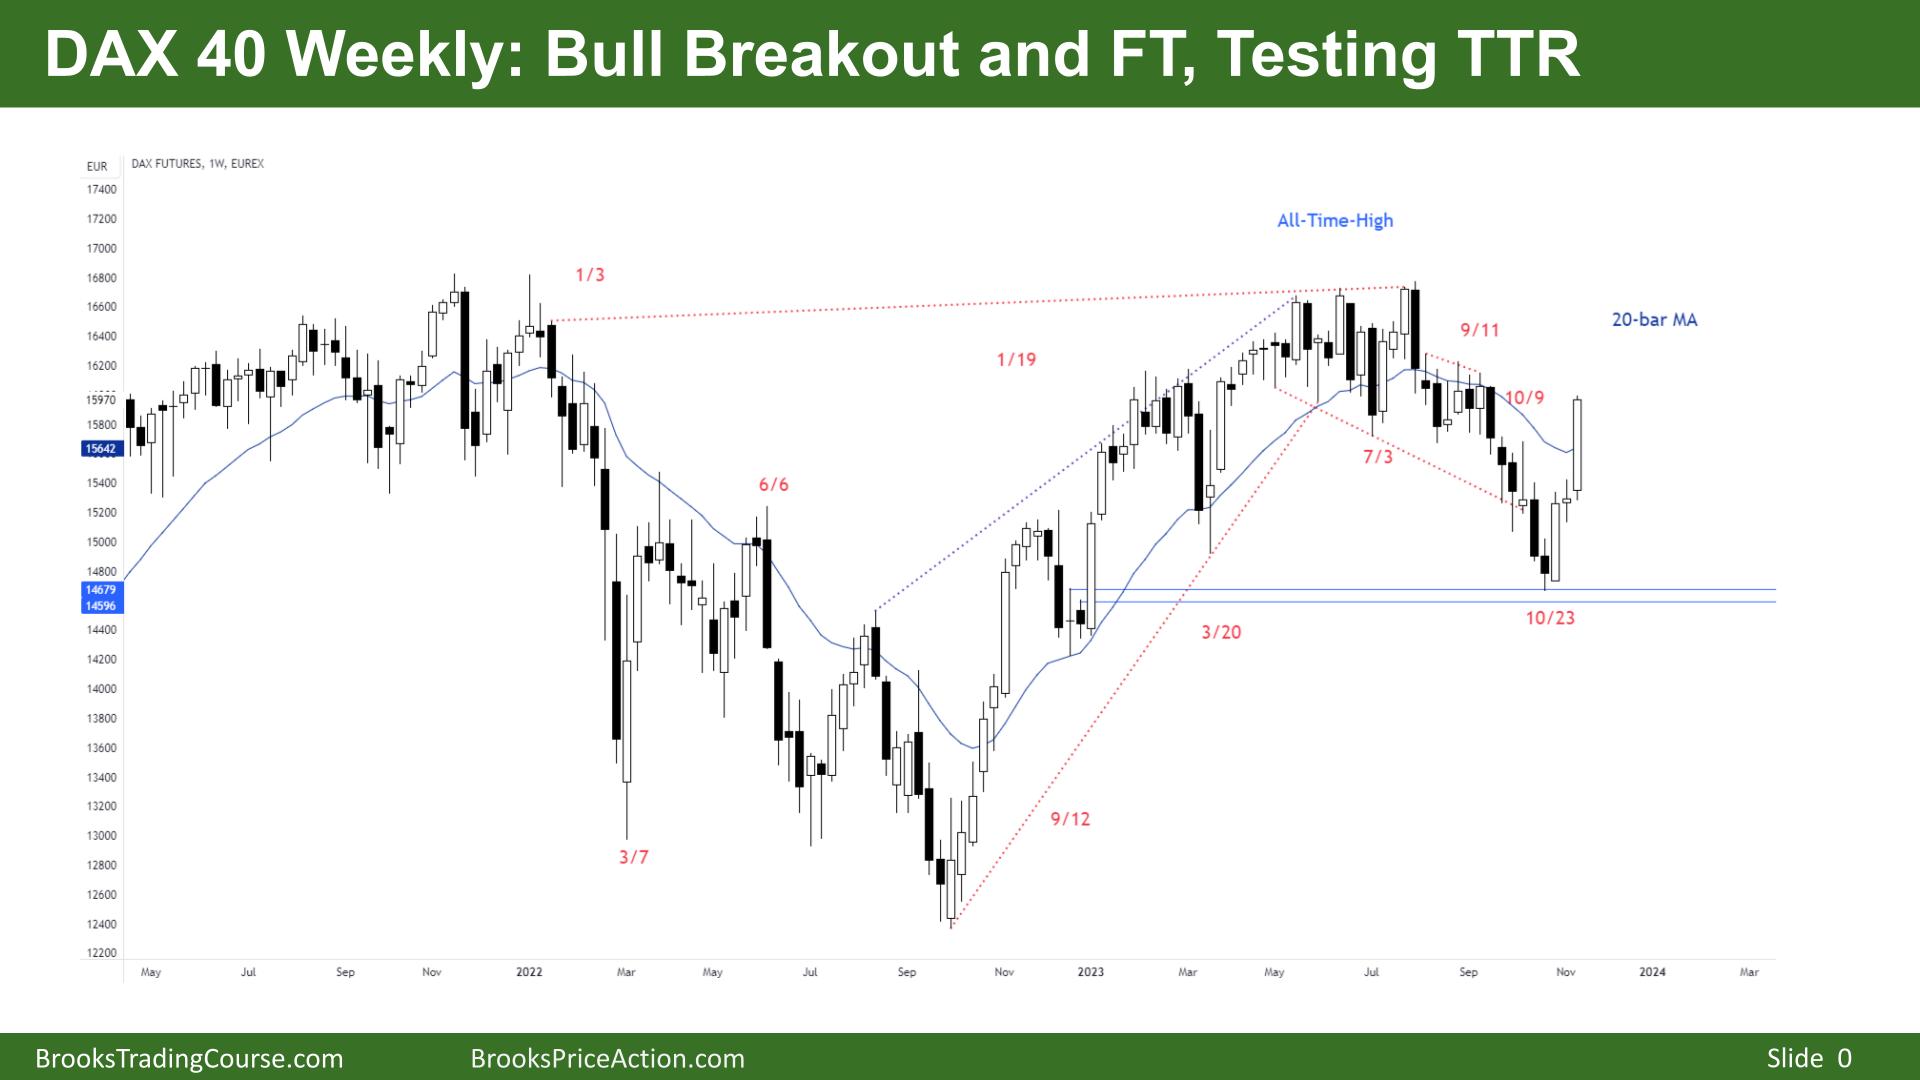 DAX 40 Bull Breakout and FT, Testing TTR